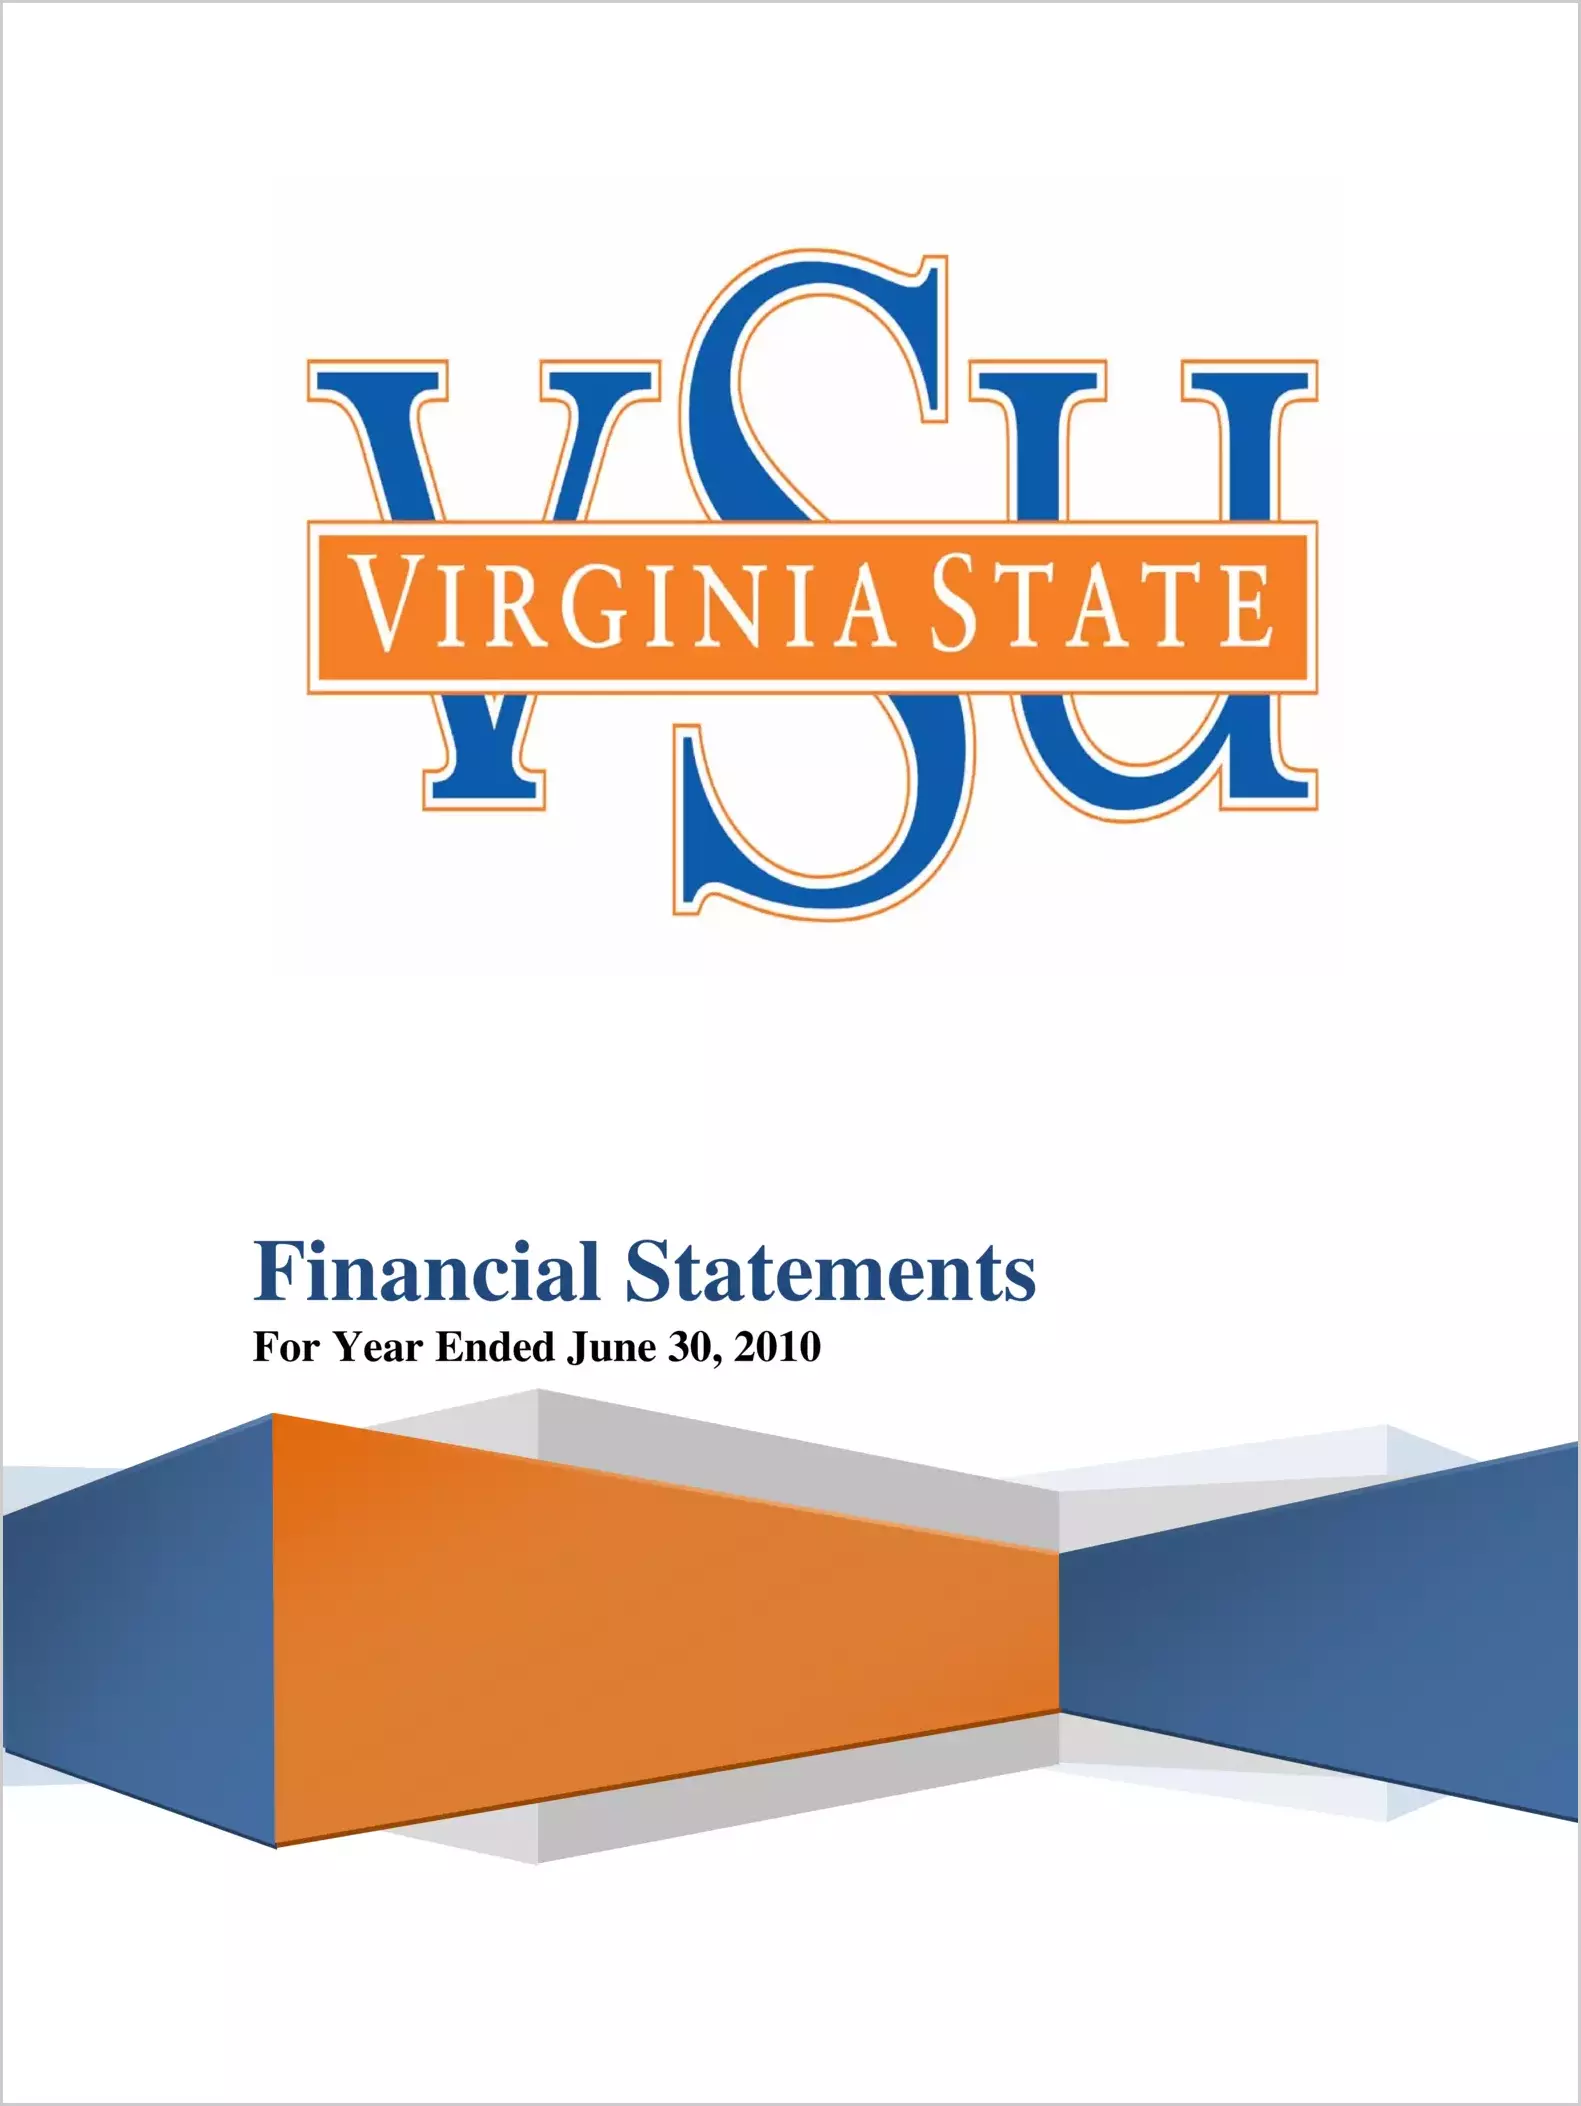 Virginia State University Financial Statements for the year ended June 30, 2010